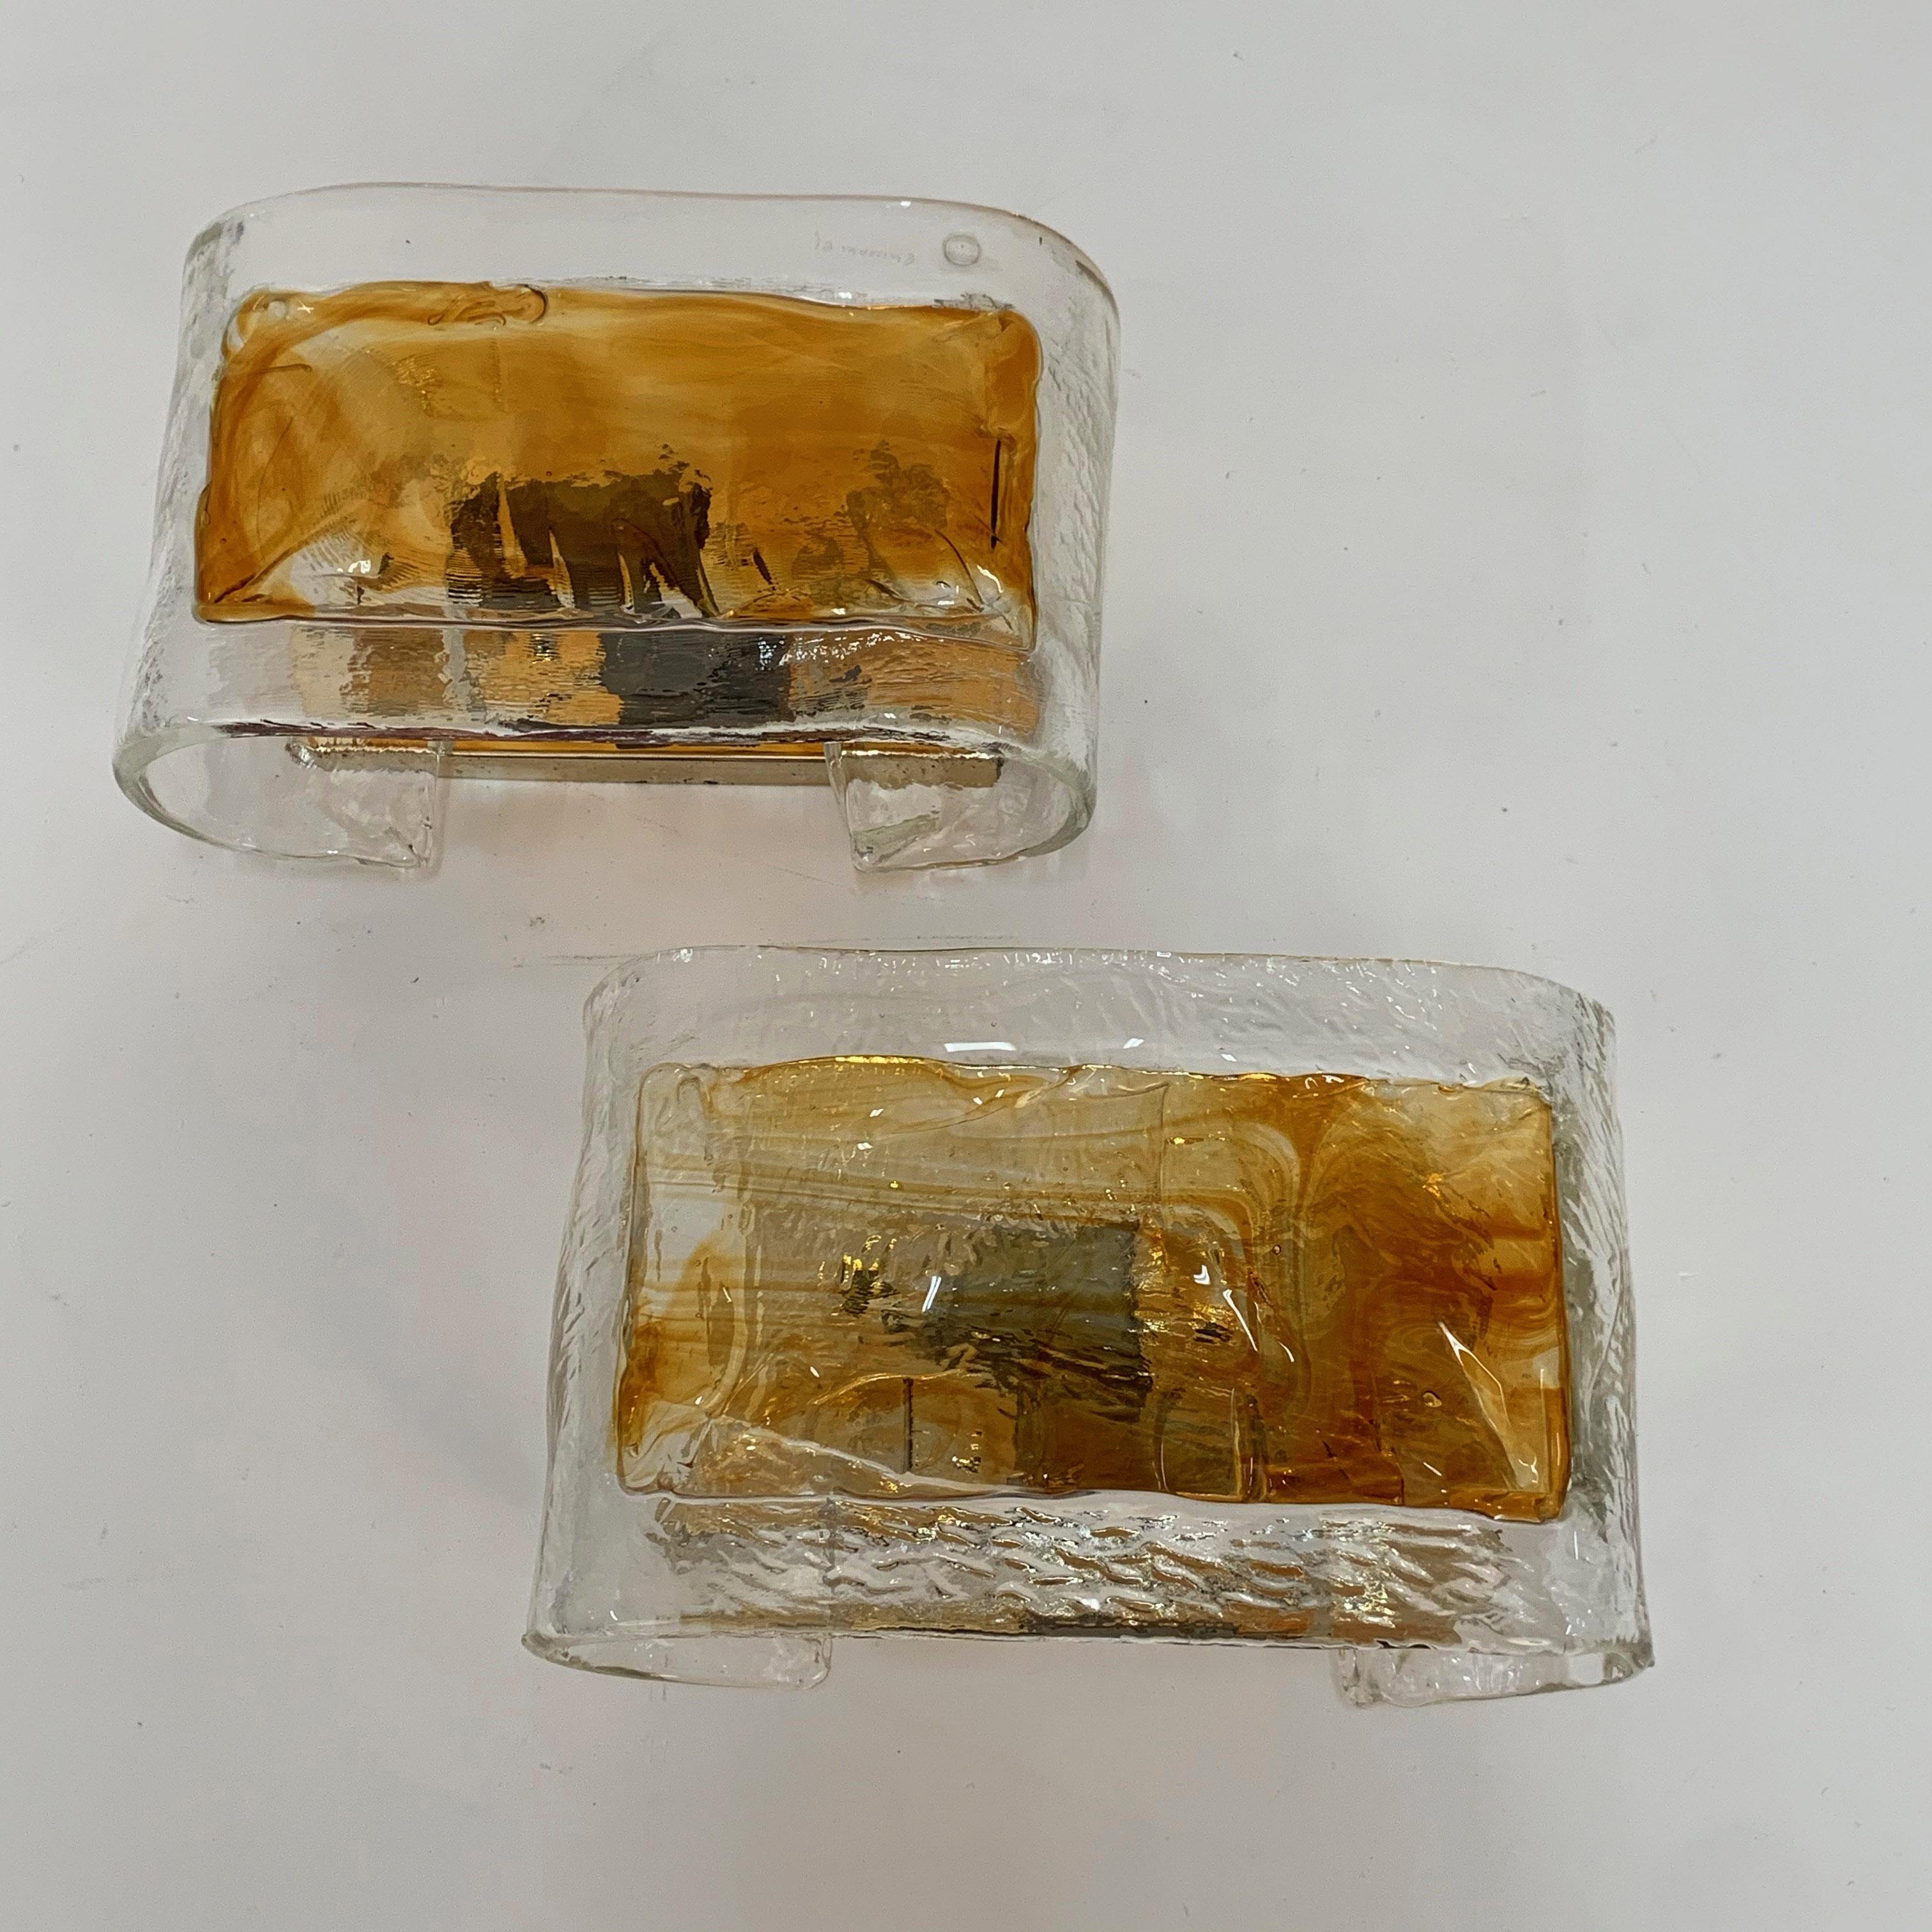 Pair of amber Murano glass wall lights. Produced by La Murrina in Italy during the 1970s.

They consist of two elements, an amber coloured Murano glass element resting on a golden metal base. Both elements influence the refraction of light,